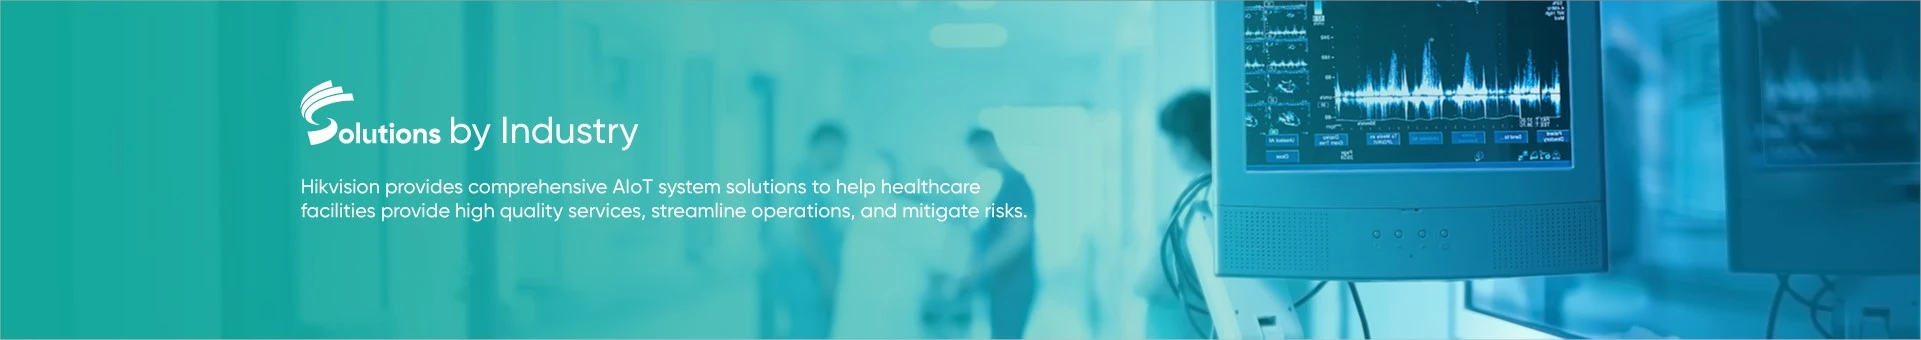 Hikvision provides comprehensive AIoT system solutions to help healthcare facilities provide high quality services, streamline operations, and mitigate risks.